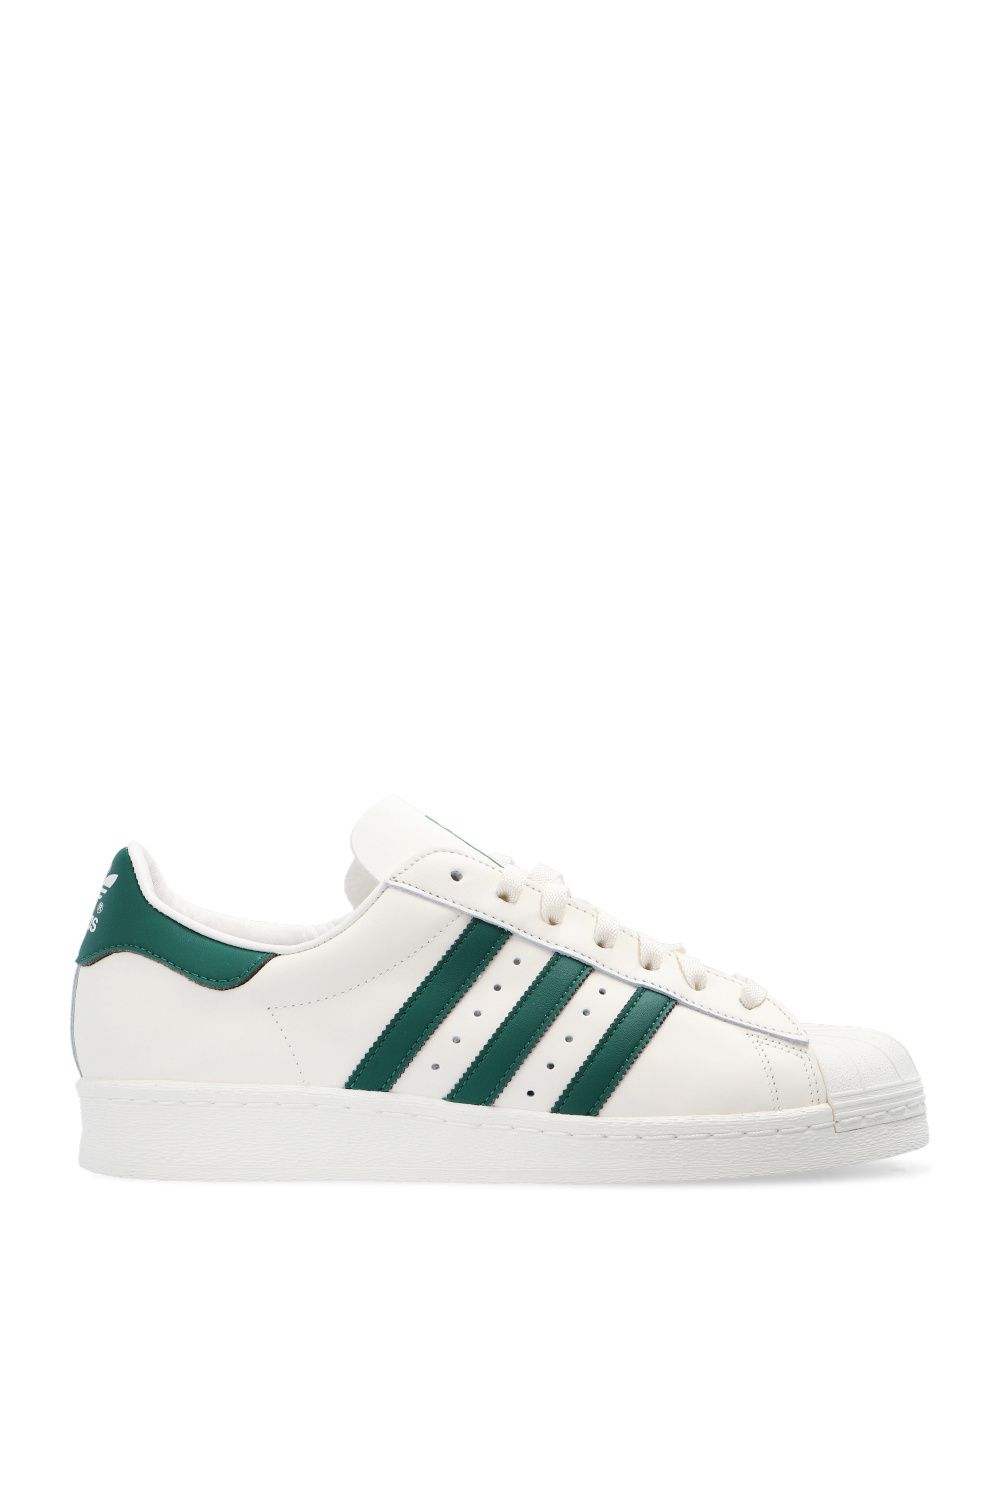 mens adidas clearance shoes